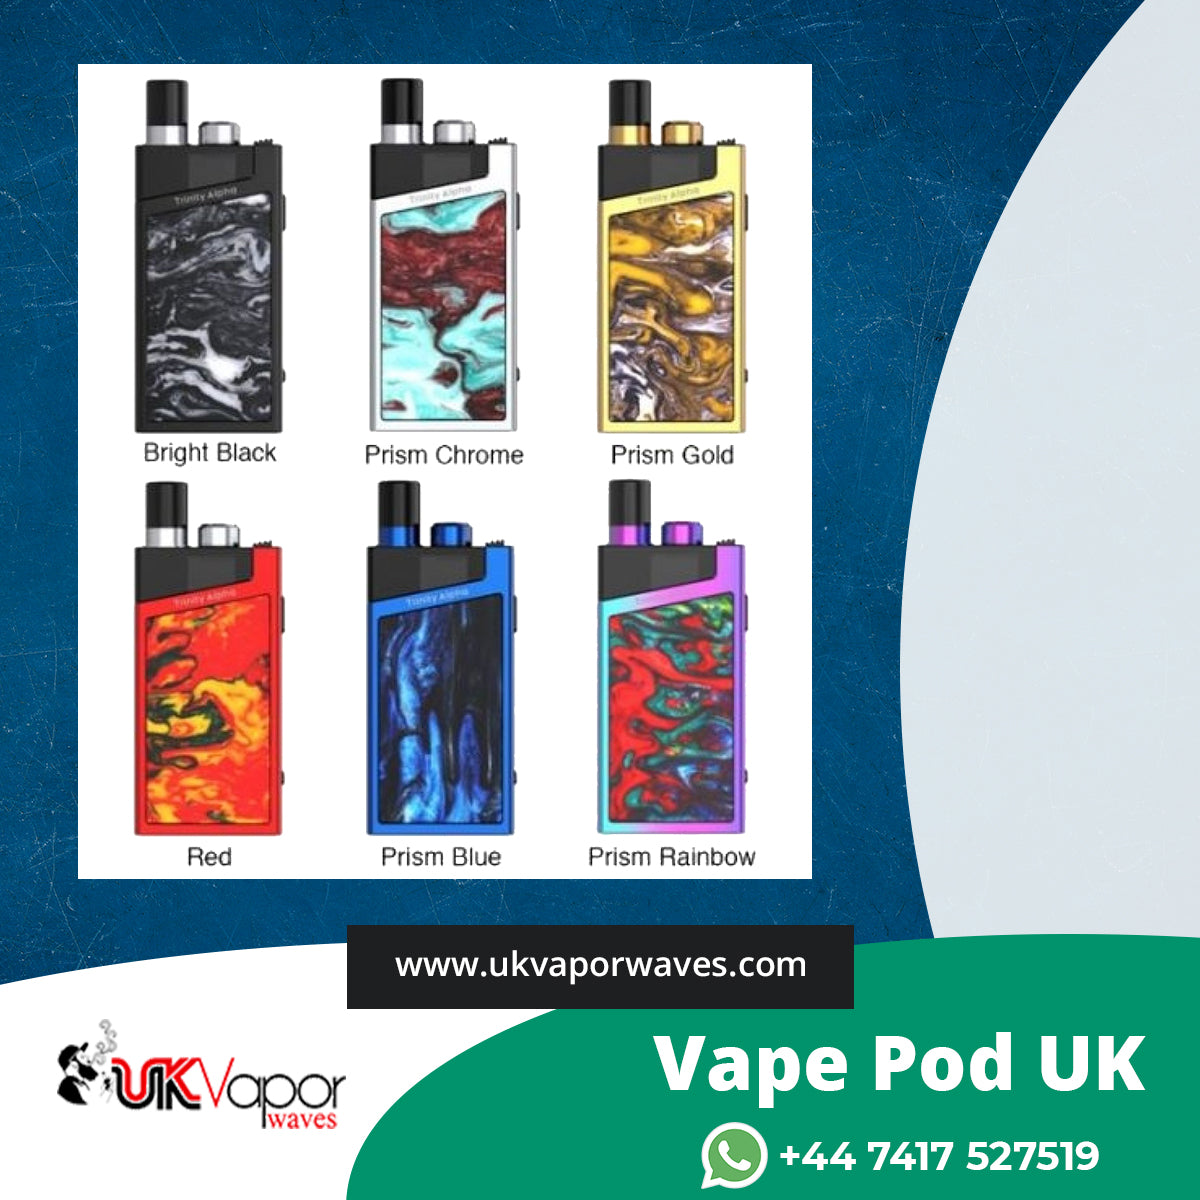 The Best Brands from whom you can get truly best Vape Pod UK